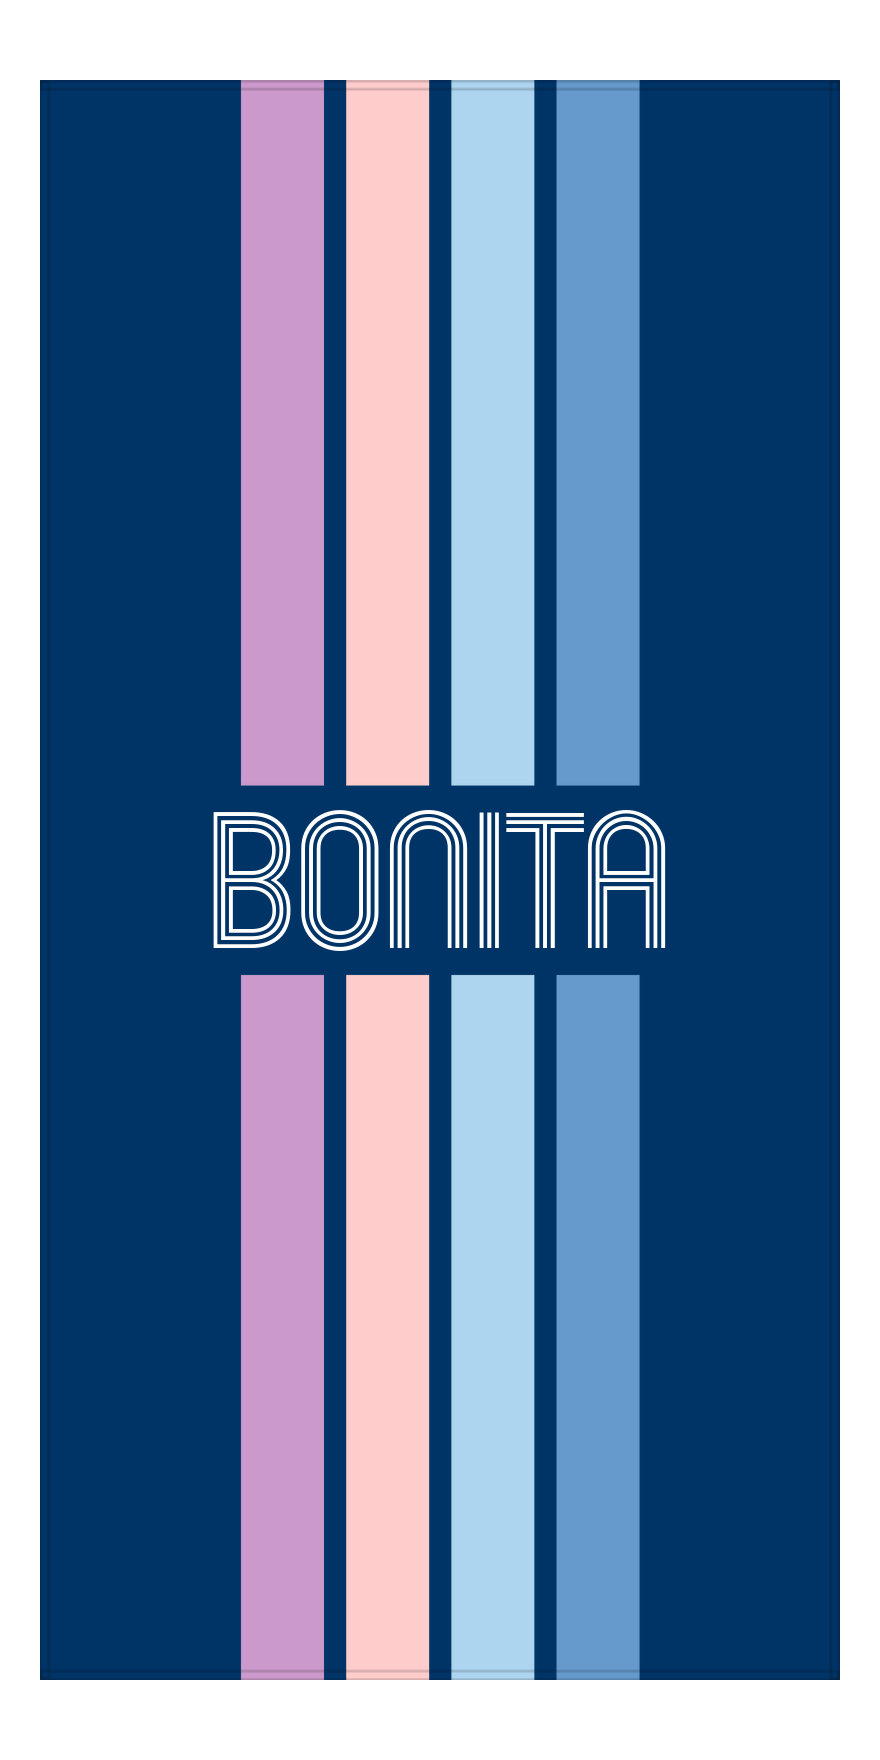 Personalized Four Stripes Beach Towel - Blue Background - Front View